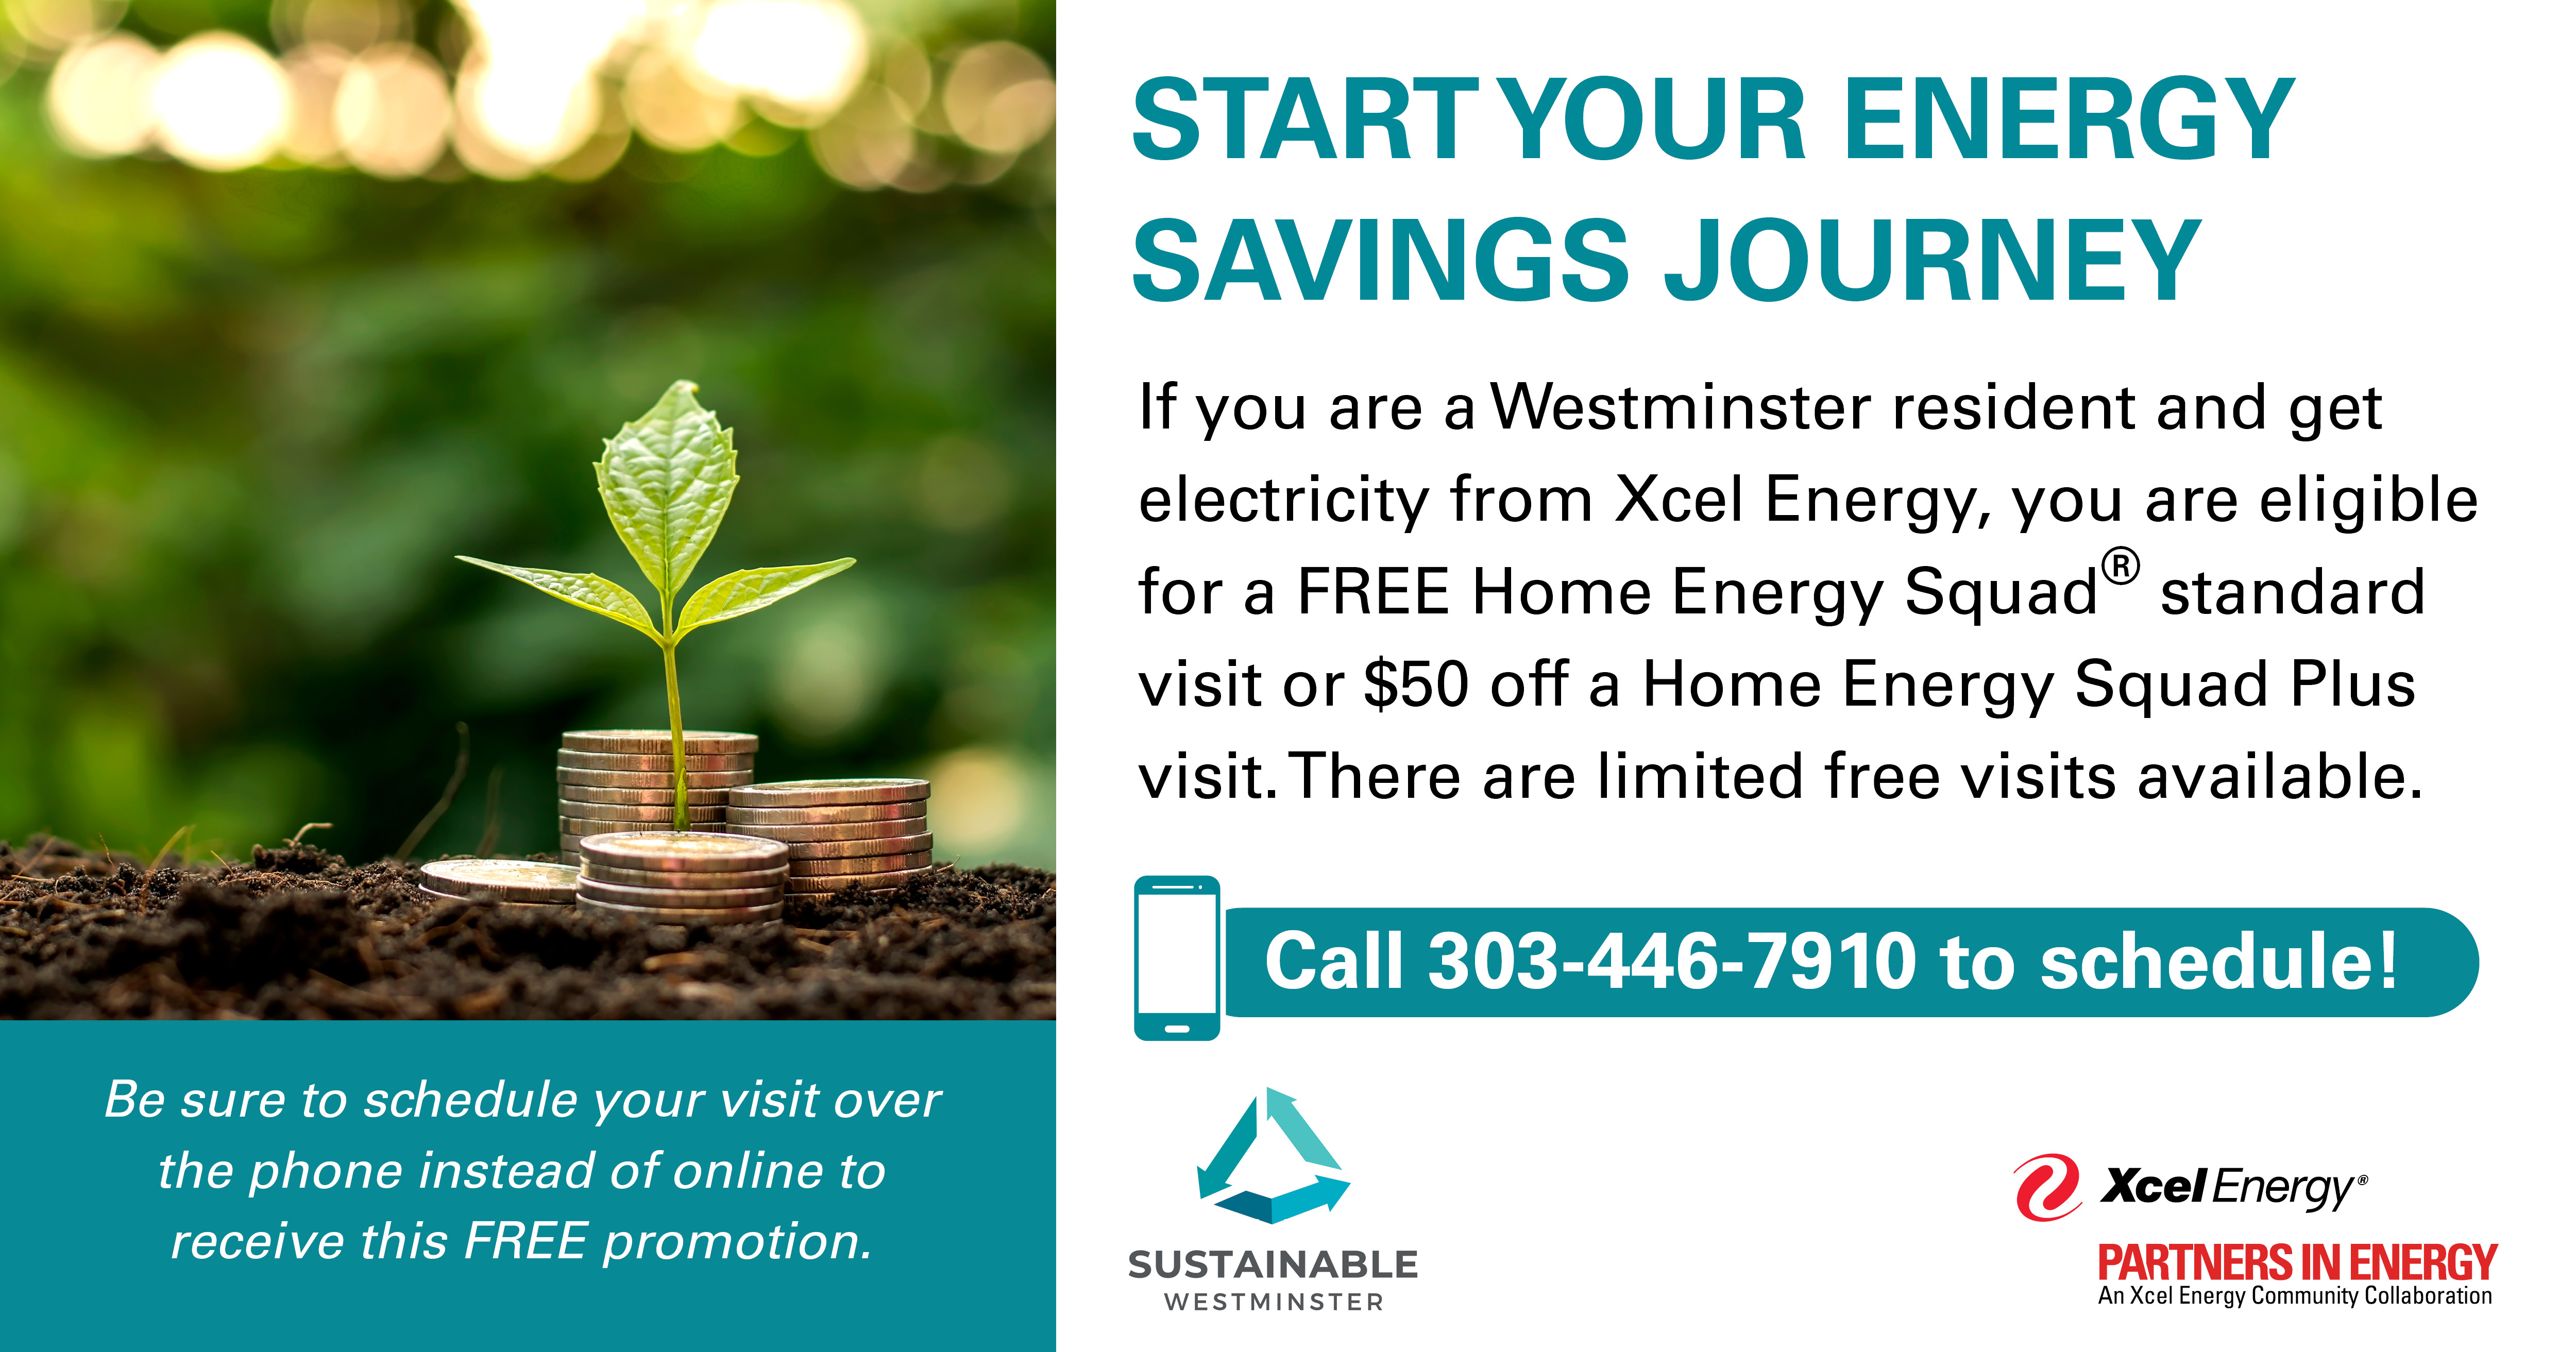 Home energy visits